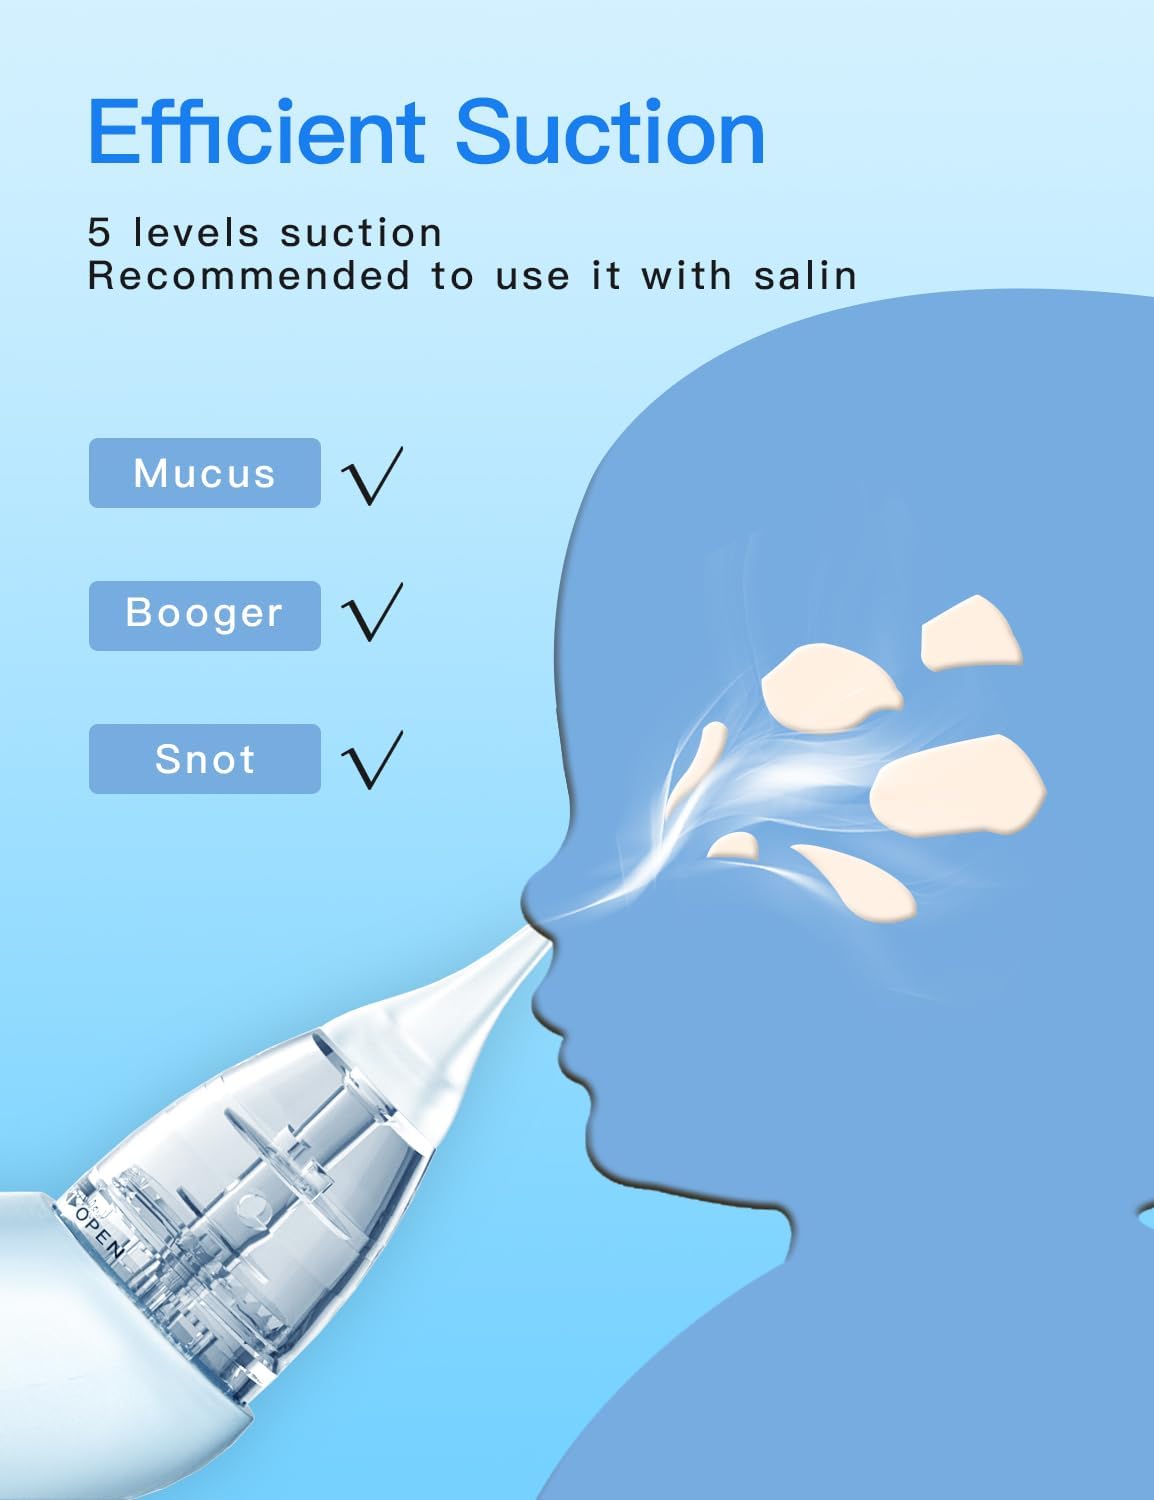 X-Bosak Baby Nasal Aspirator, Electric Nose Sucker with 5 Levels Suction, Soothing Light & Nursery Rhymes (White)